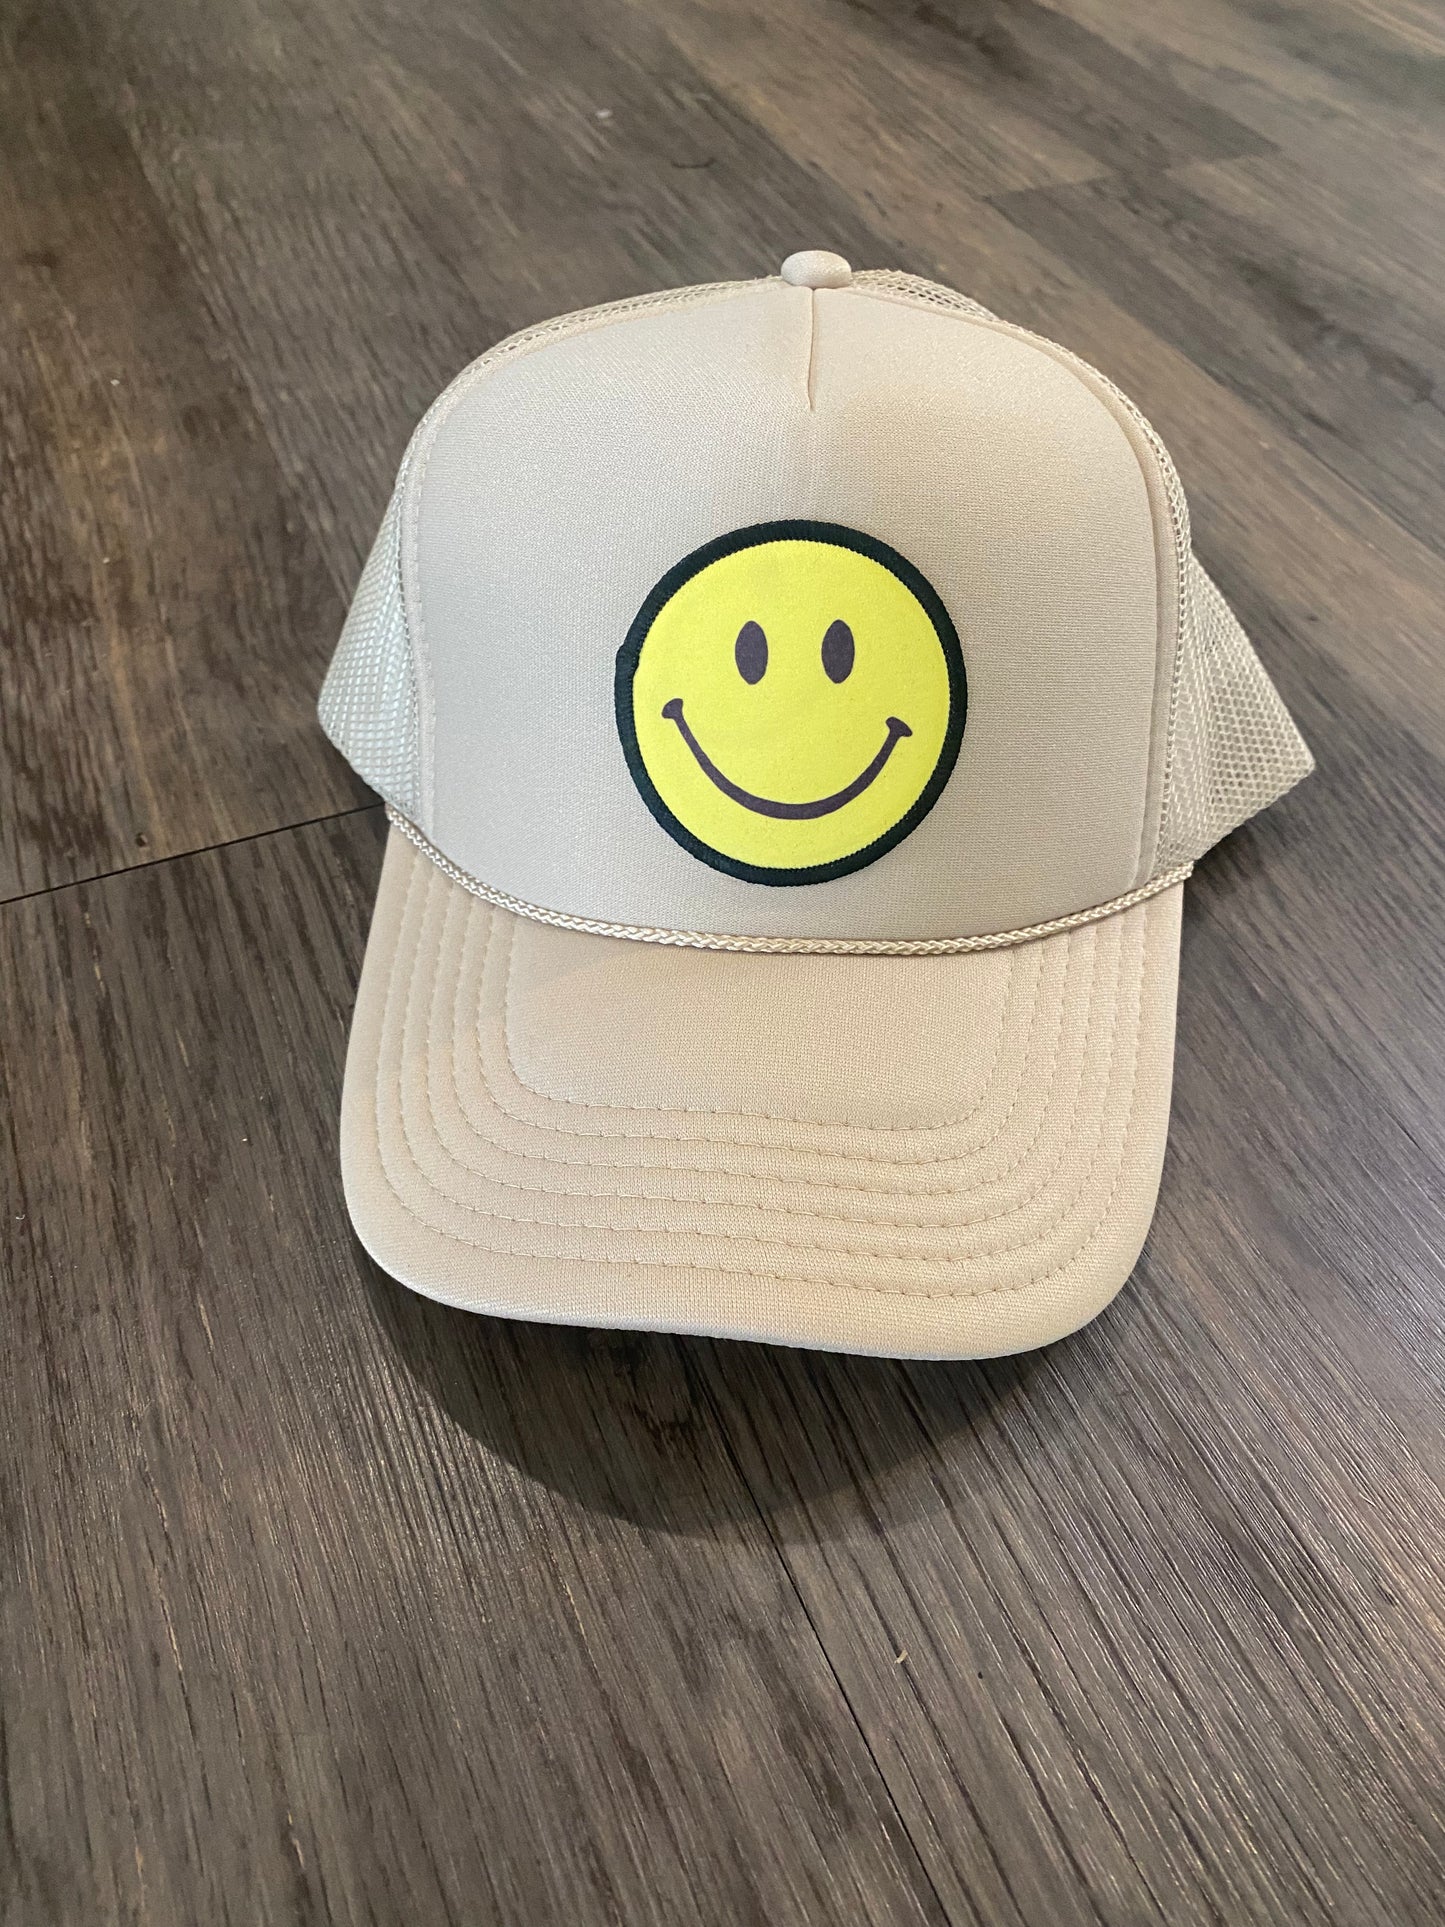 Smile Face Hats